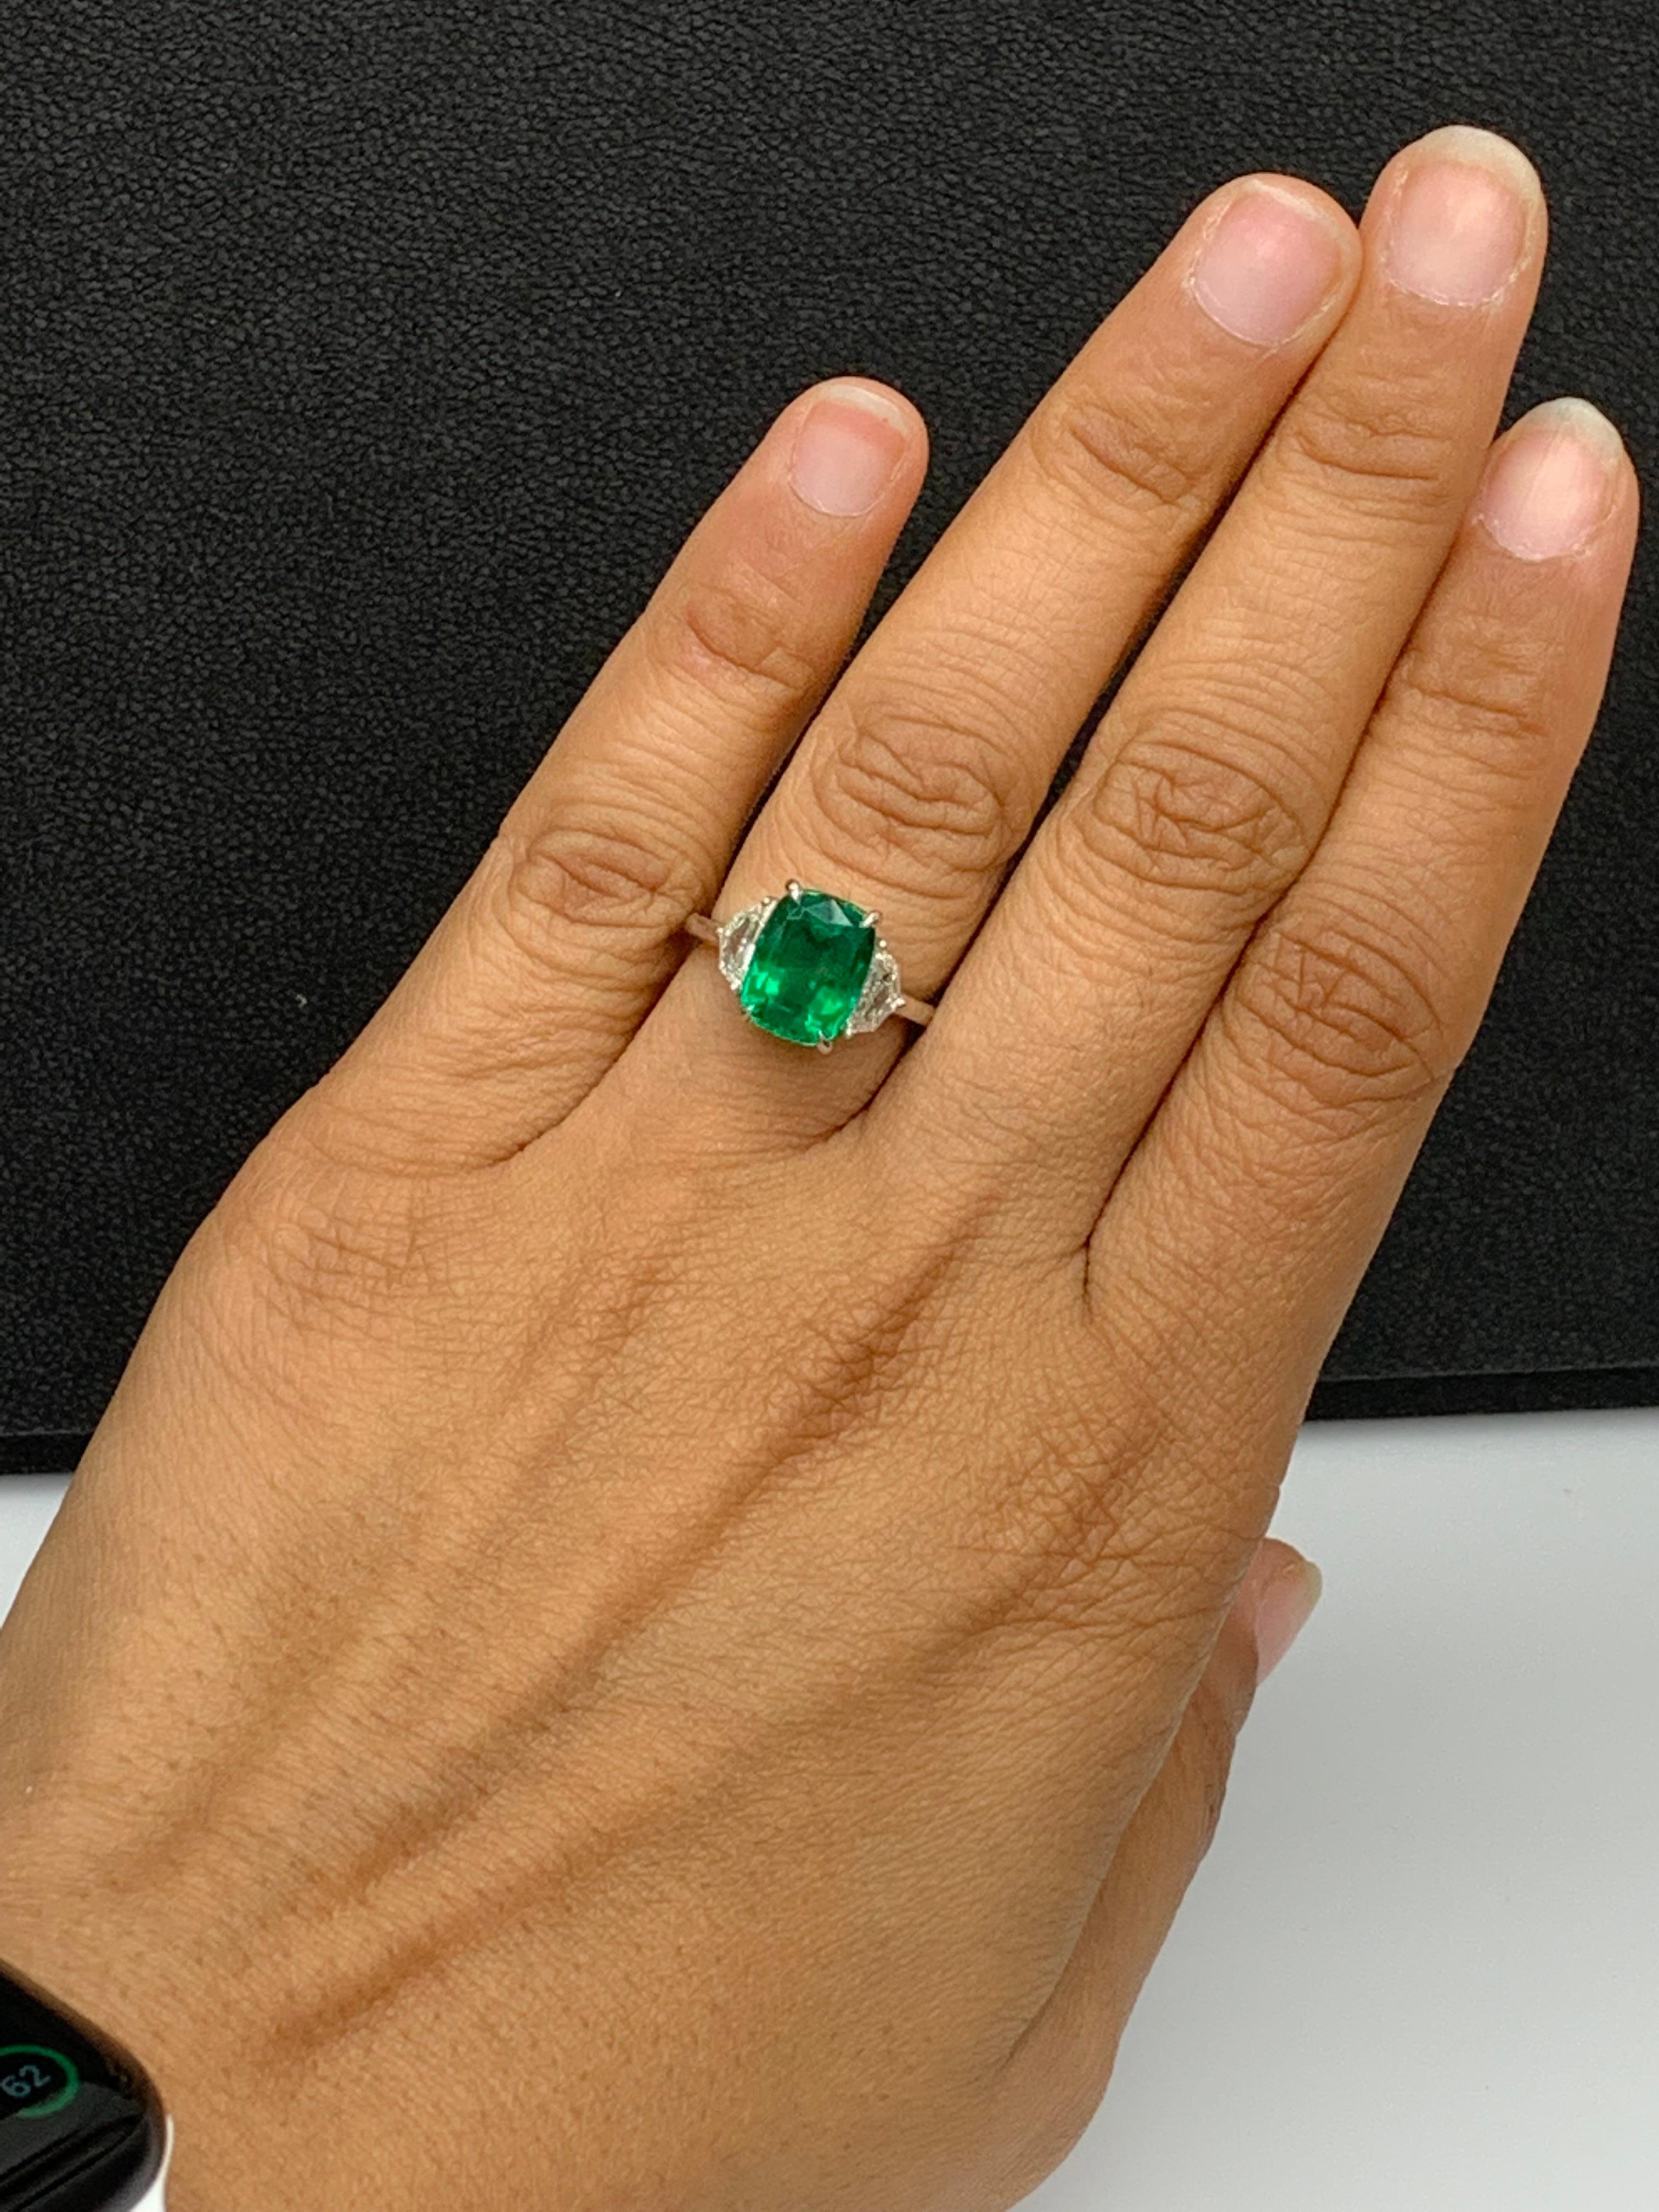 Certified 3.49 Carat Cushion Cut Emerald & Diamond Engagement Ring in Platinum For Sale 7